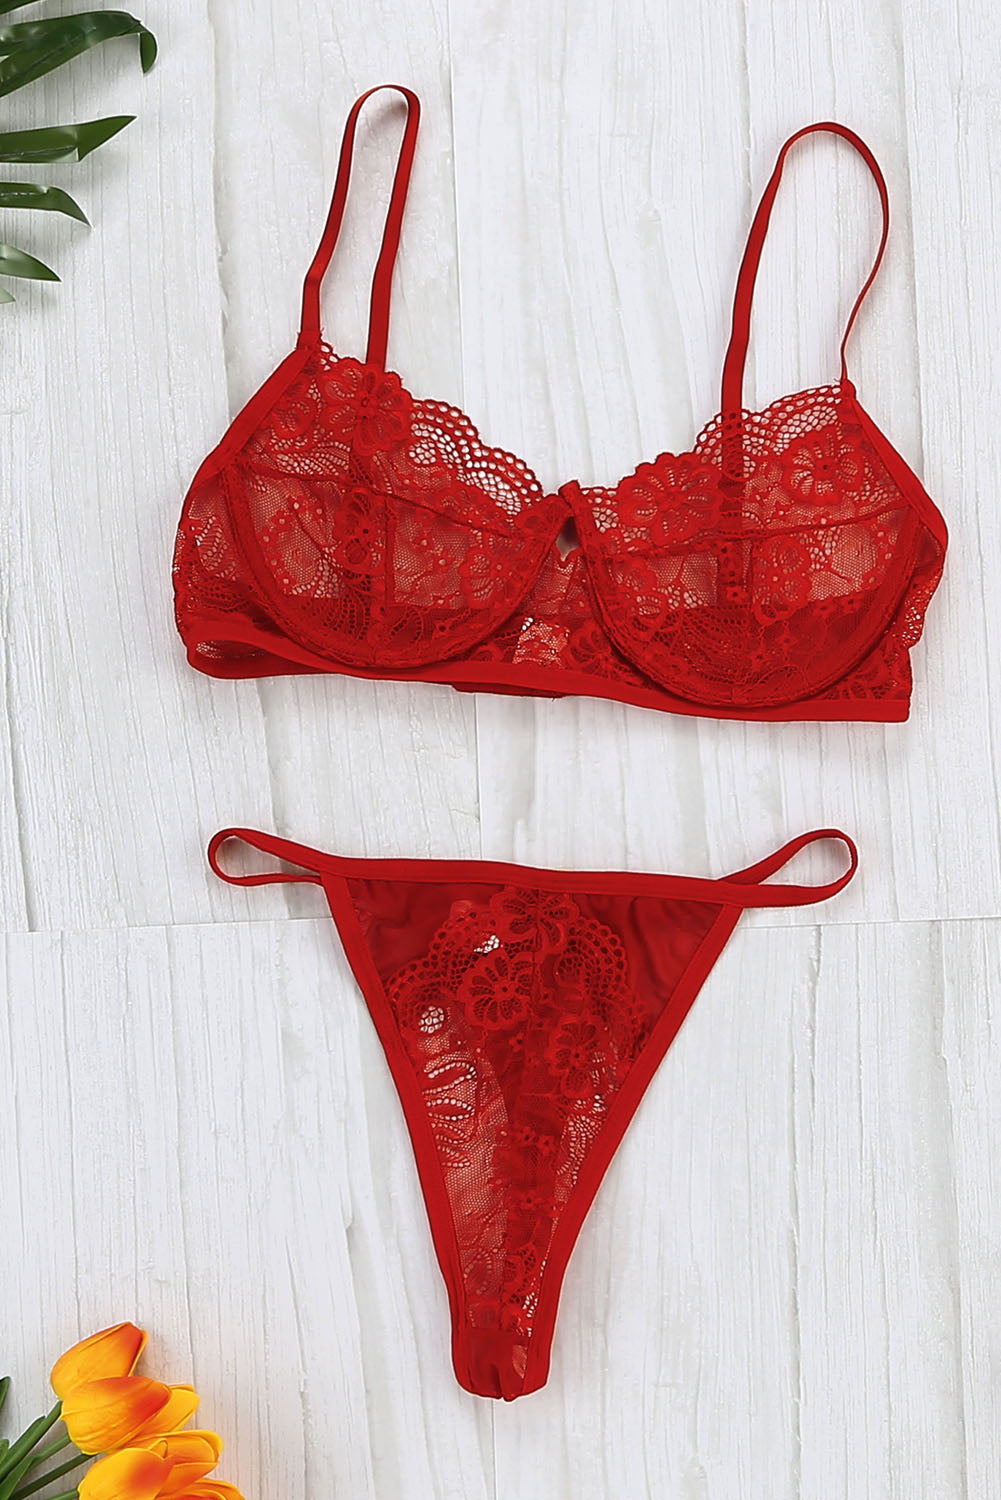 Masquerade's Red Sexy Lingerie Bralette  & Thong